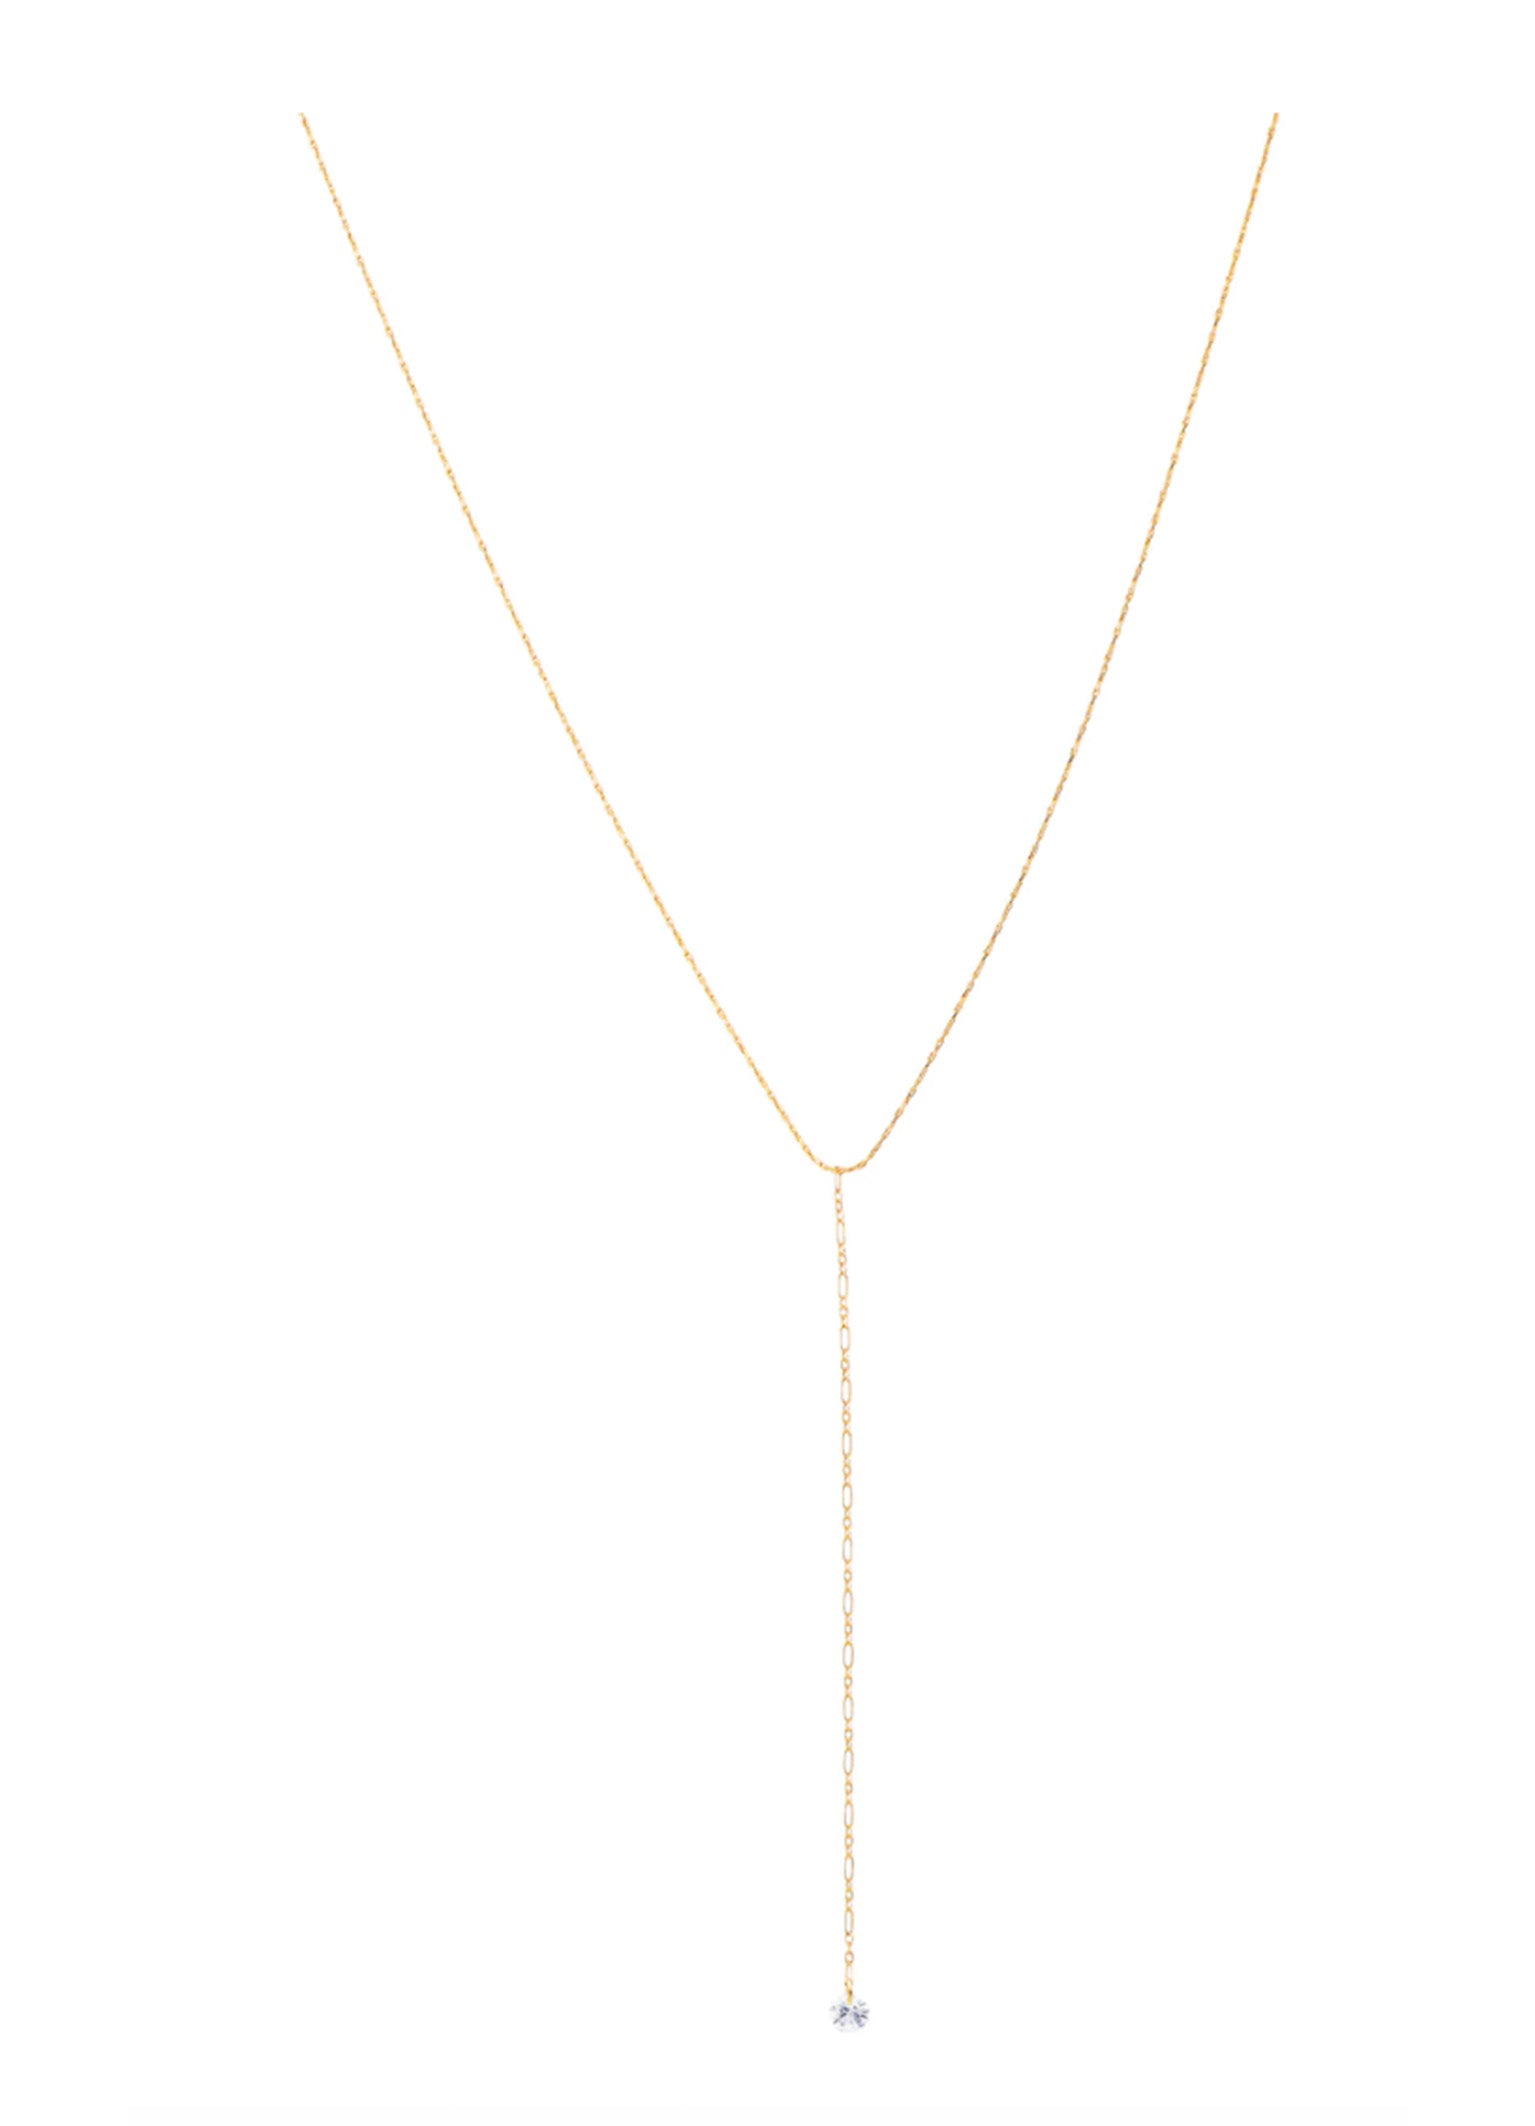 Collier Eternity Long, GUILA PARIS, made in France